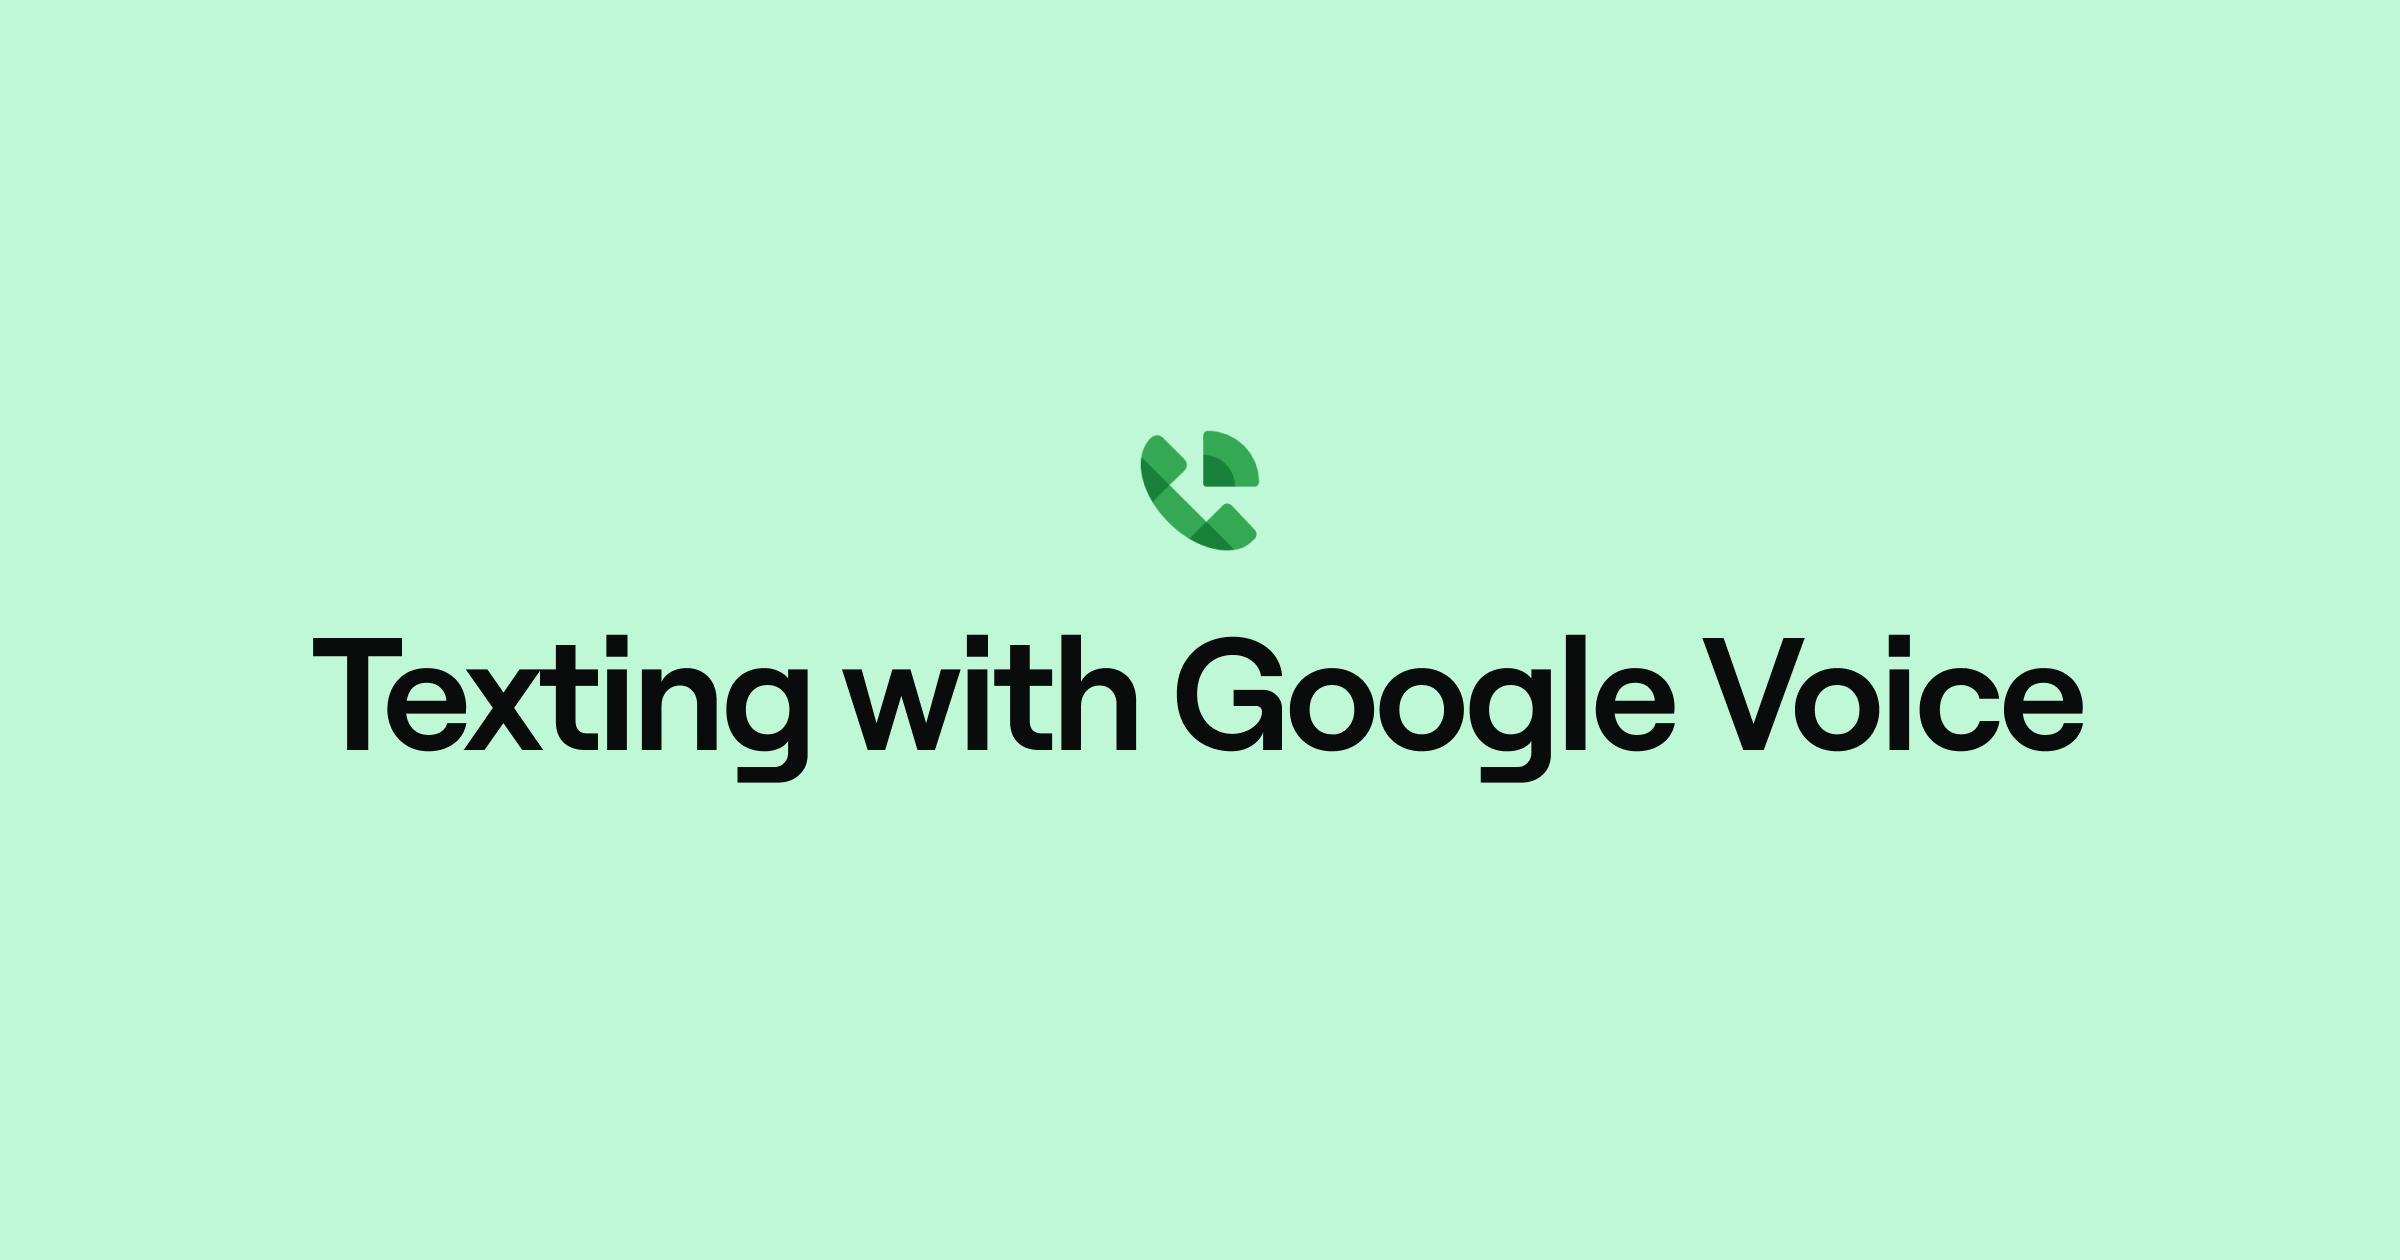 Texting with Google Voice